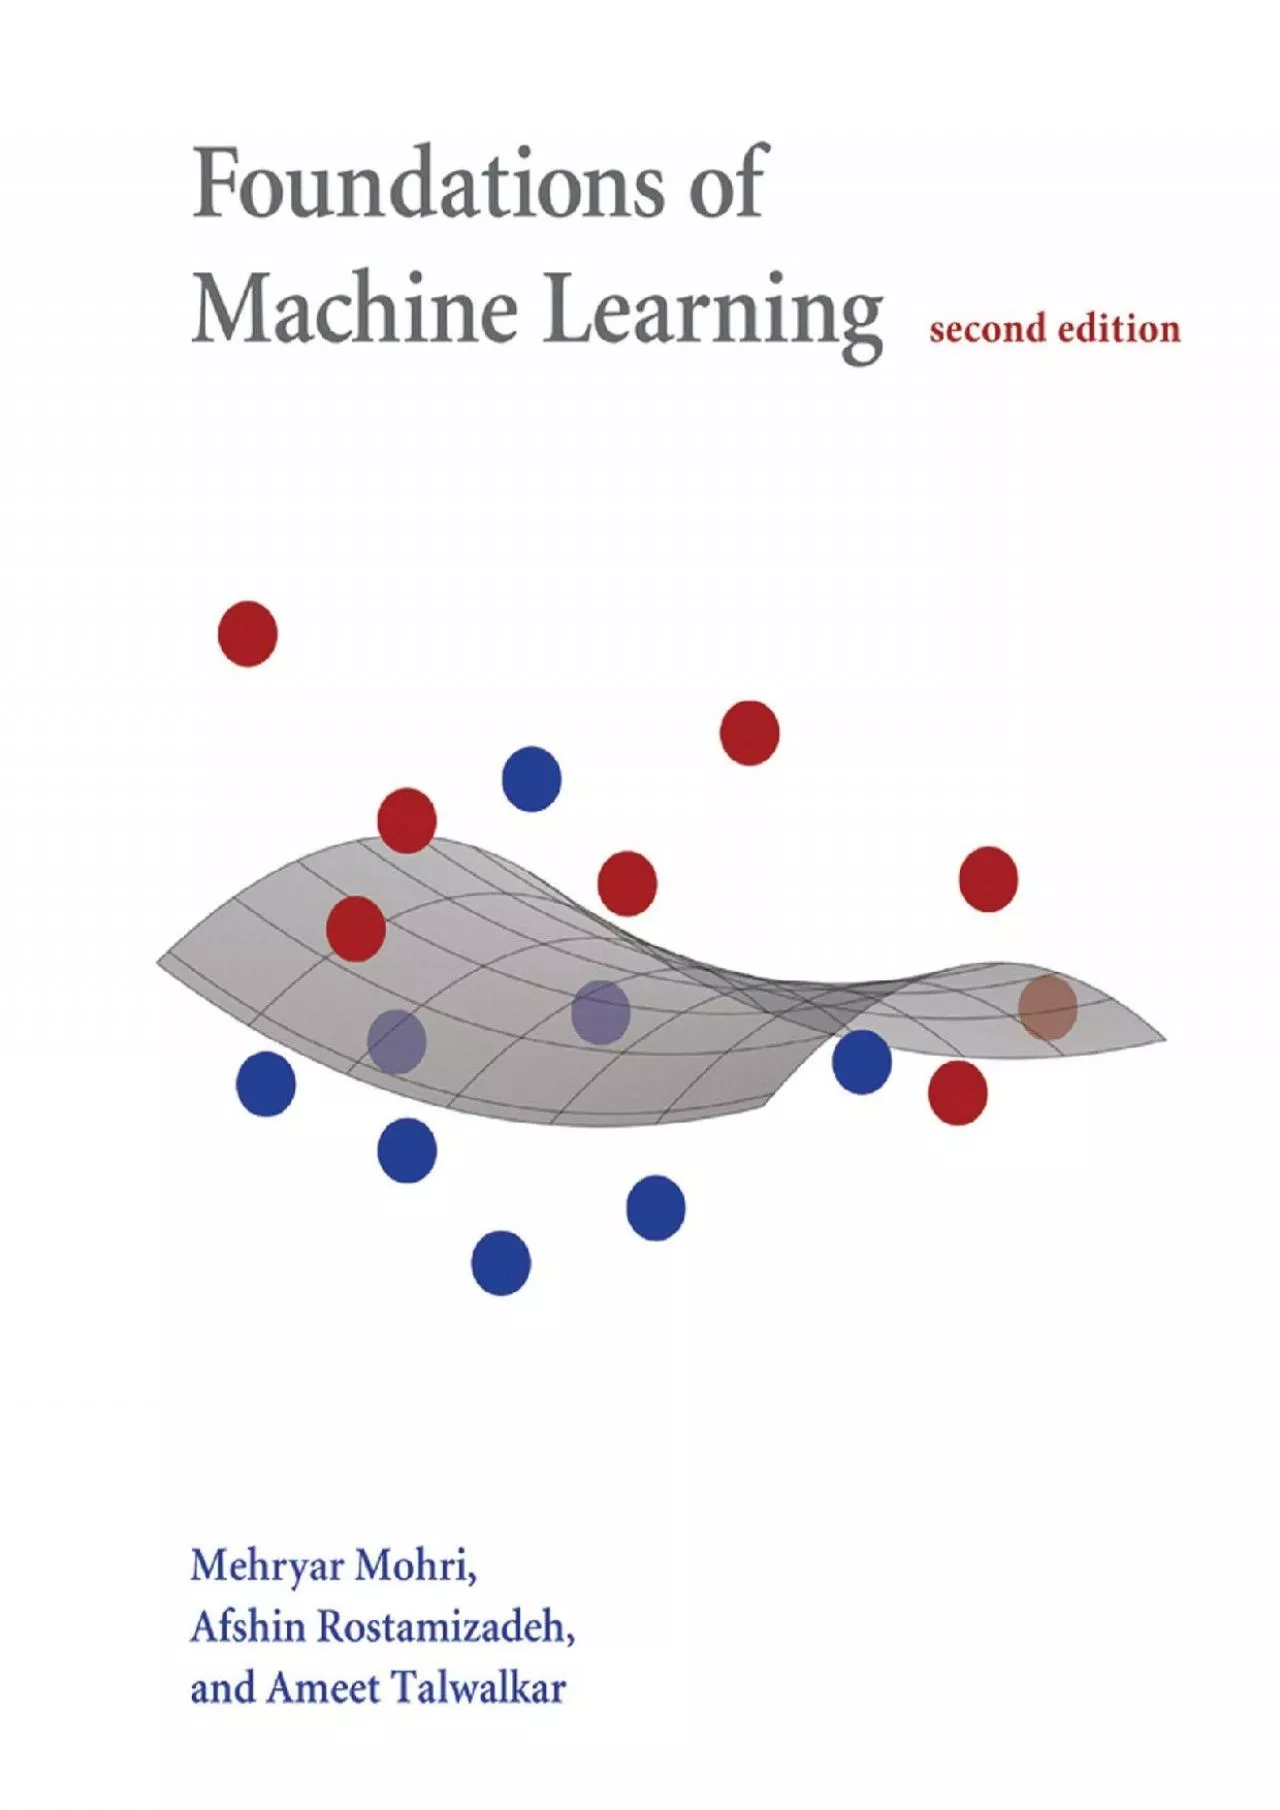 (DOWNLOAD)-Foundations of Machine Learning, second edition (Adaptive Computation and Machine